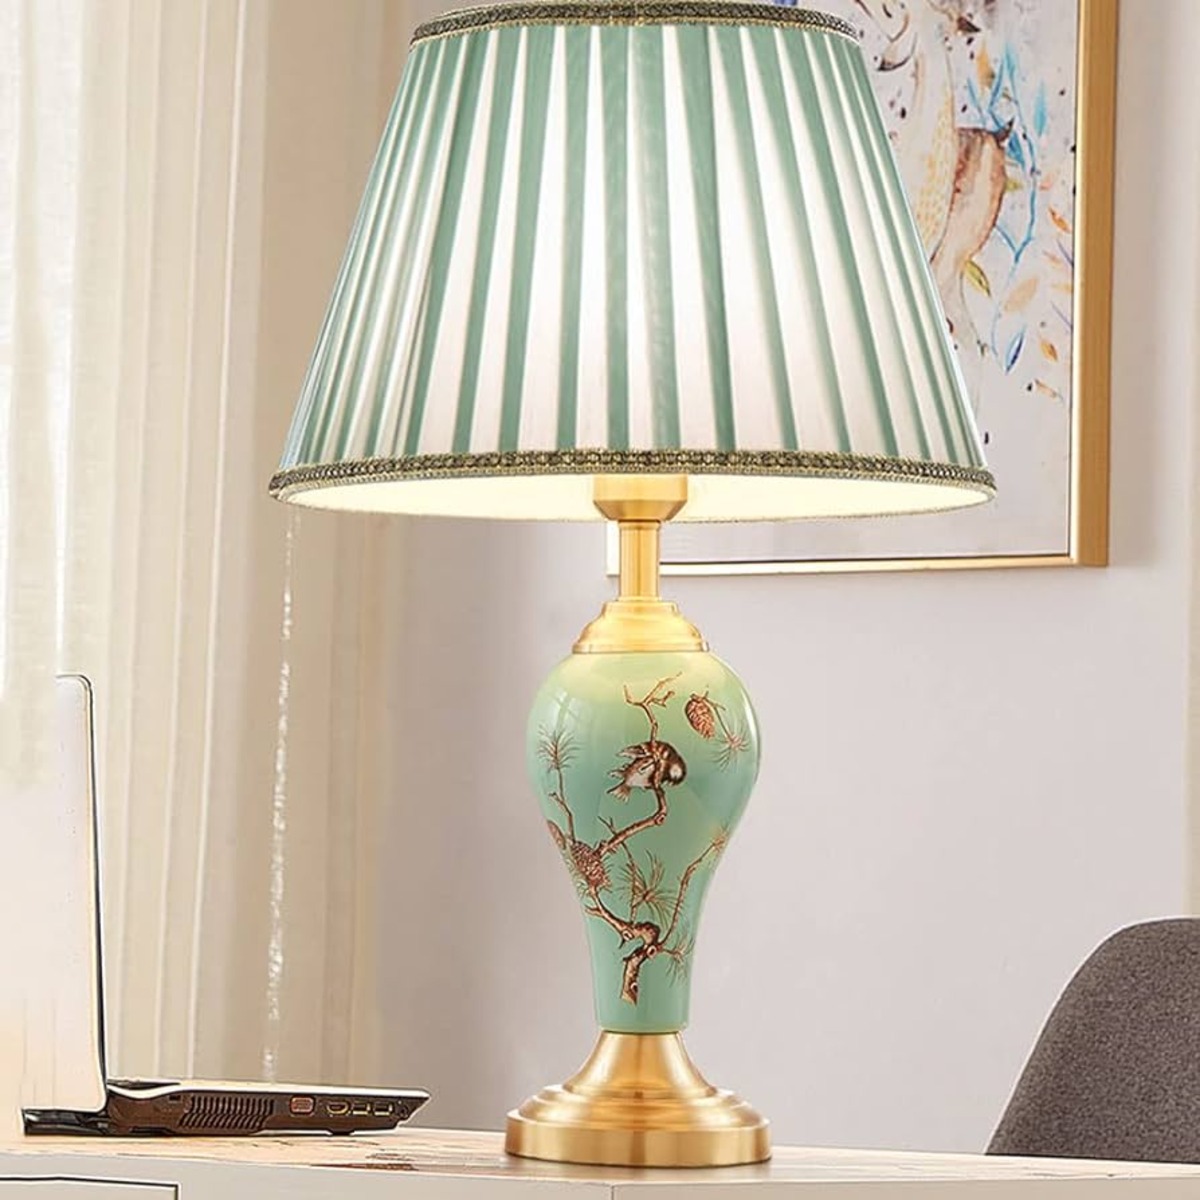 How To Paint A Lamp Base